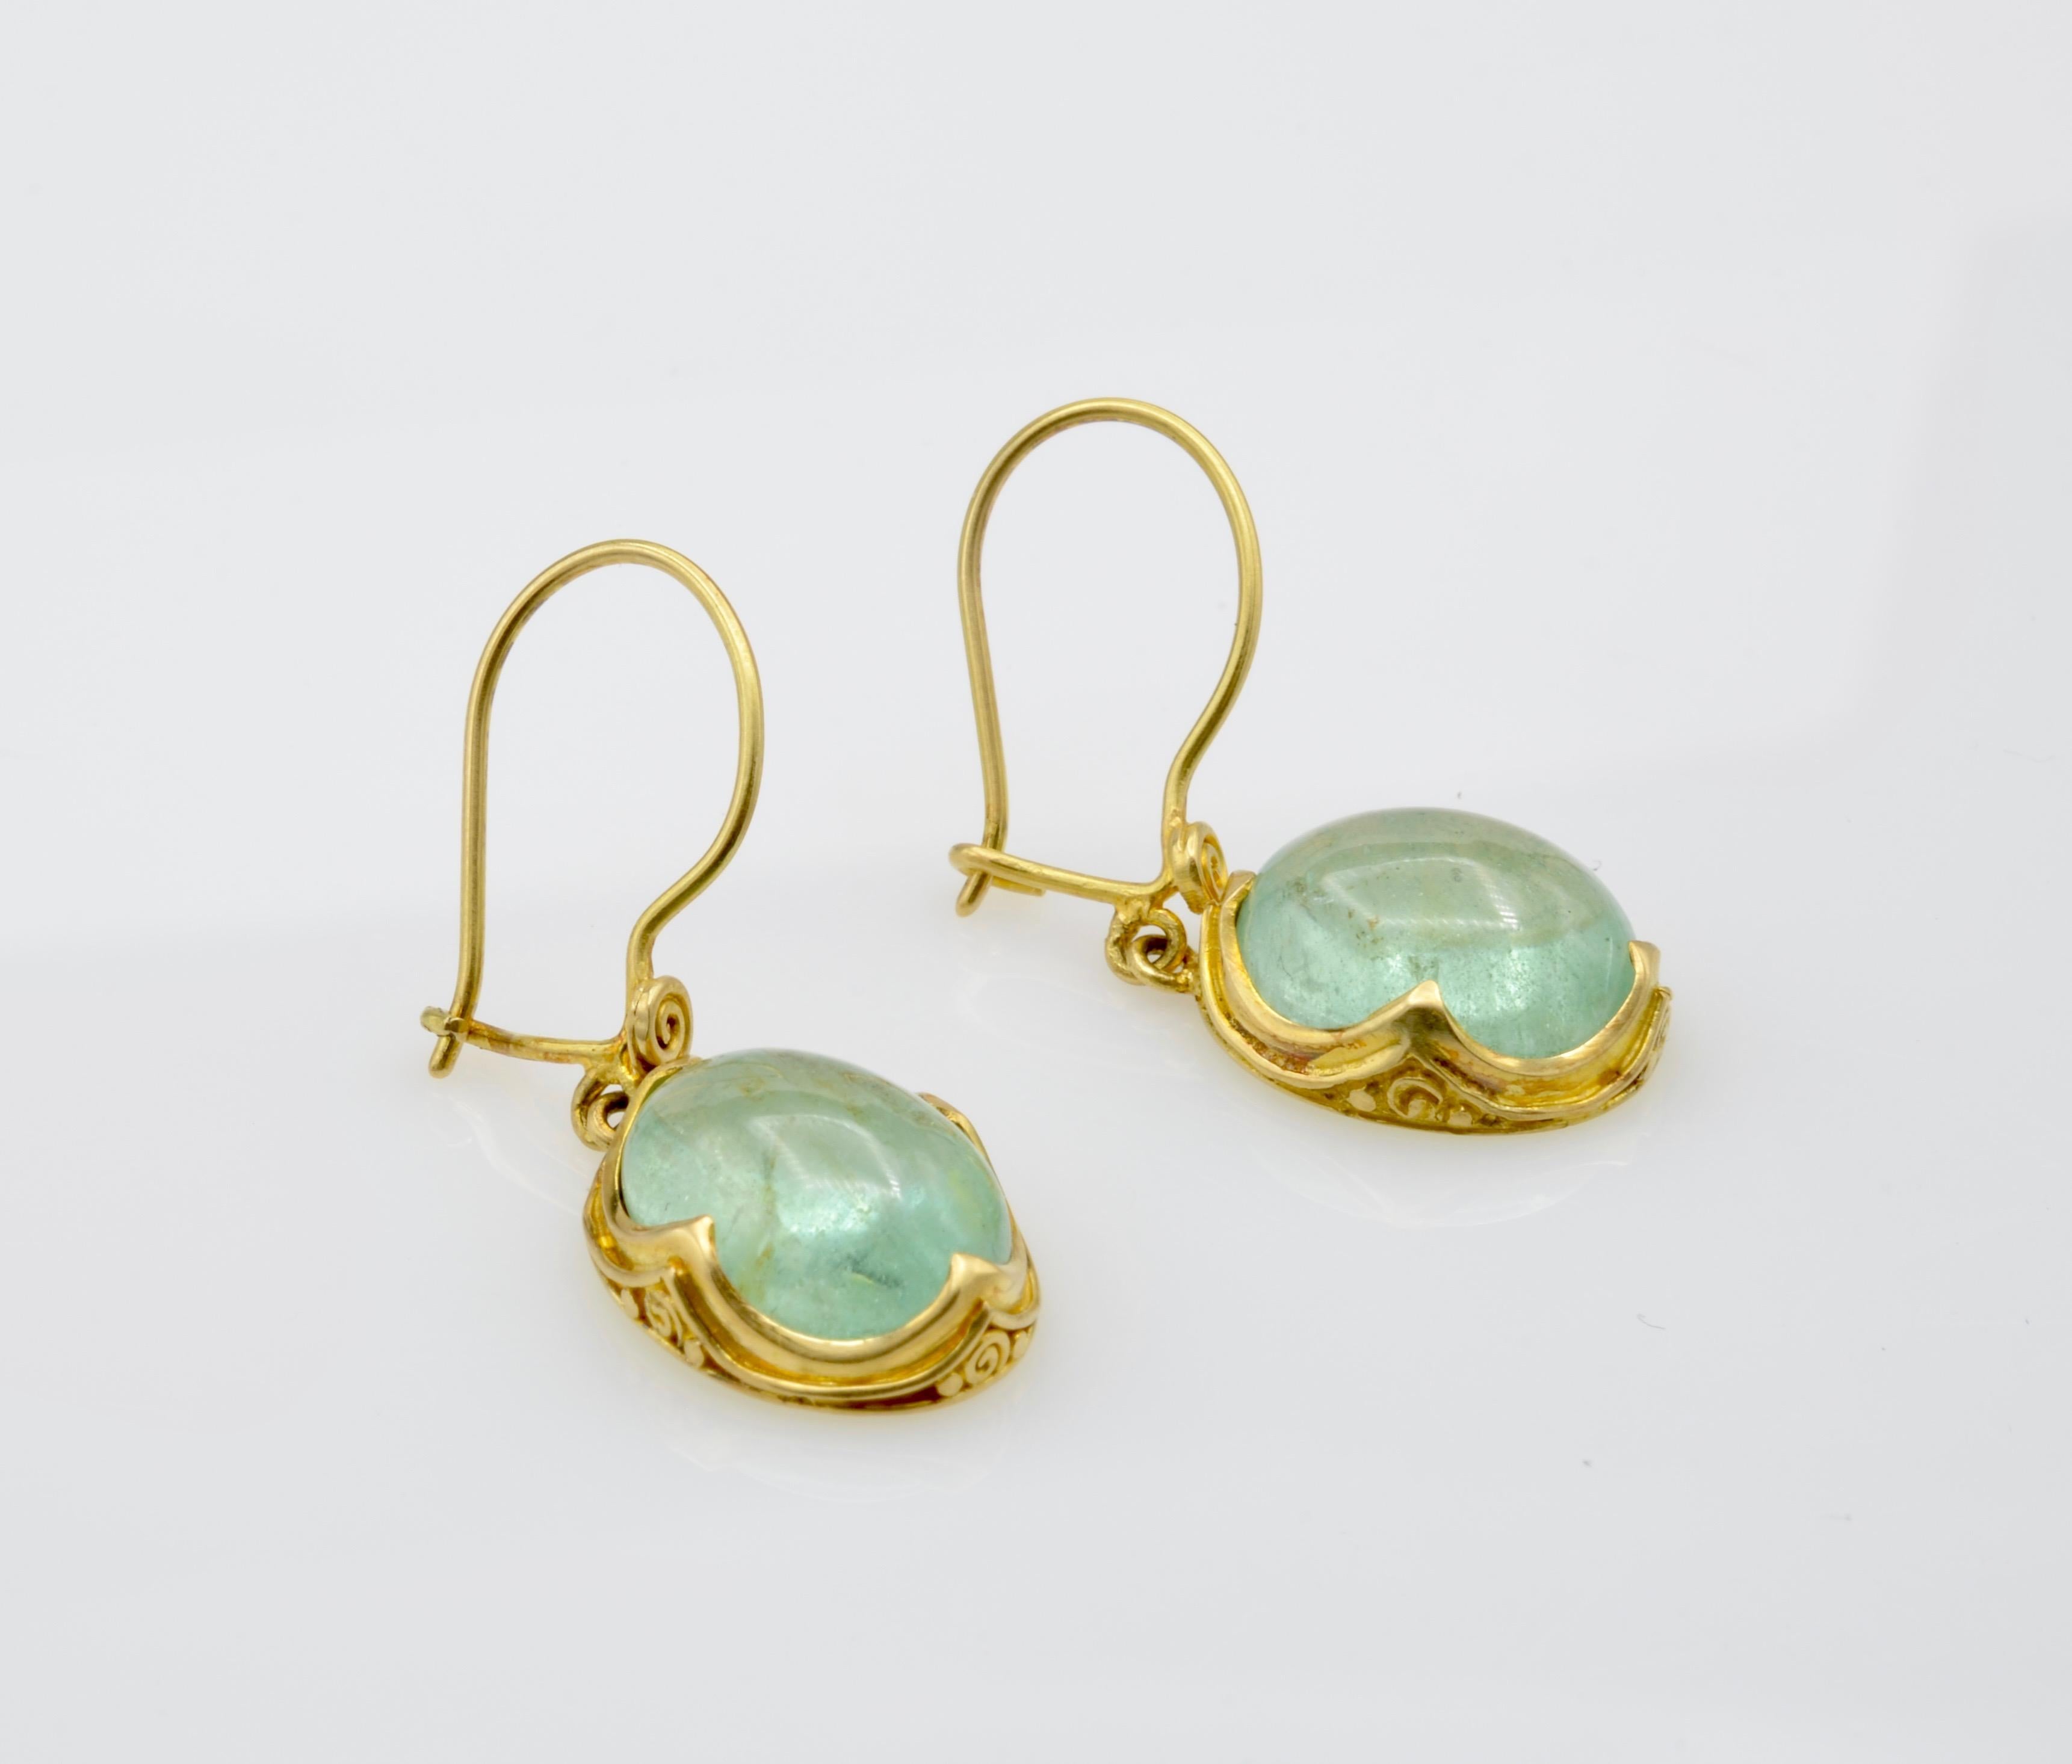 These lovely aquamarine earrings are a turquoise watery blue that dance with refracted light. The 22k bezel beautifully frame these aprox. 3ct each aquamarines with a swirl design ear wire. These are great everyday and/or special occasion earrings.